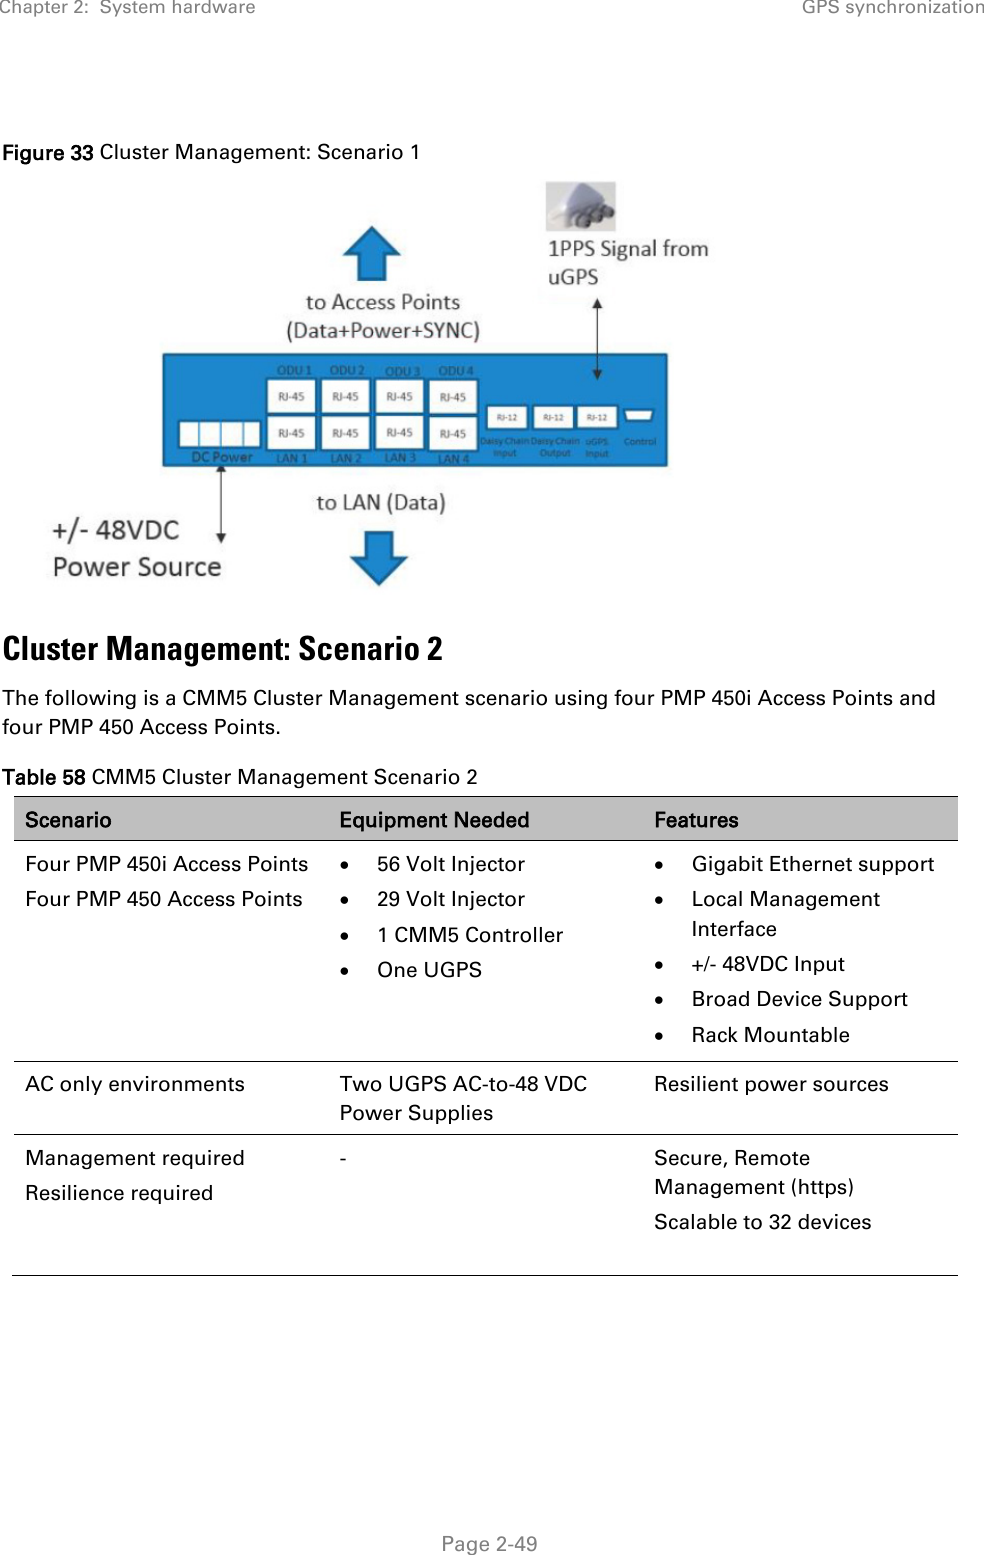 Chapter 2:  System hardware GPS synchronization   Page 2-49  Figure 33 Cluster Management: Scenario 1  Cluster Management: Scenario 2 The following is a CMM5 Cluster Management scenario using four PMP 450i Access Points and four PMP 450 Access Points. Table 58 CMM5 Cluster Management Scenario 2 Scenario Equipment Needed Features Four PMP 450i Access Points Four PMP 450 Access Points • 56 Volt Injector • 29 Volt Injector • 1 CMM5 Controller • One UGPS • Gigabit Ethernet support • Local Management Interface • +/- 48VDC Input • Broad Device Support • Rack Mountable AC only environments Two UGPS AC-to-48 VDC Power Supplies Resilient power sources Management required Resilience required -  Secure, Remote Management (https) Scalable to 32 devices    